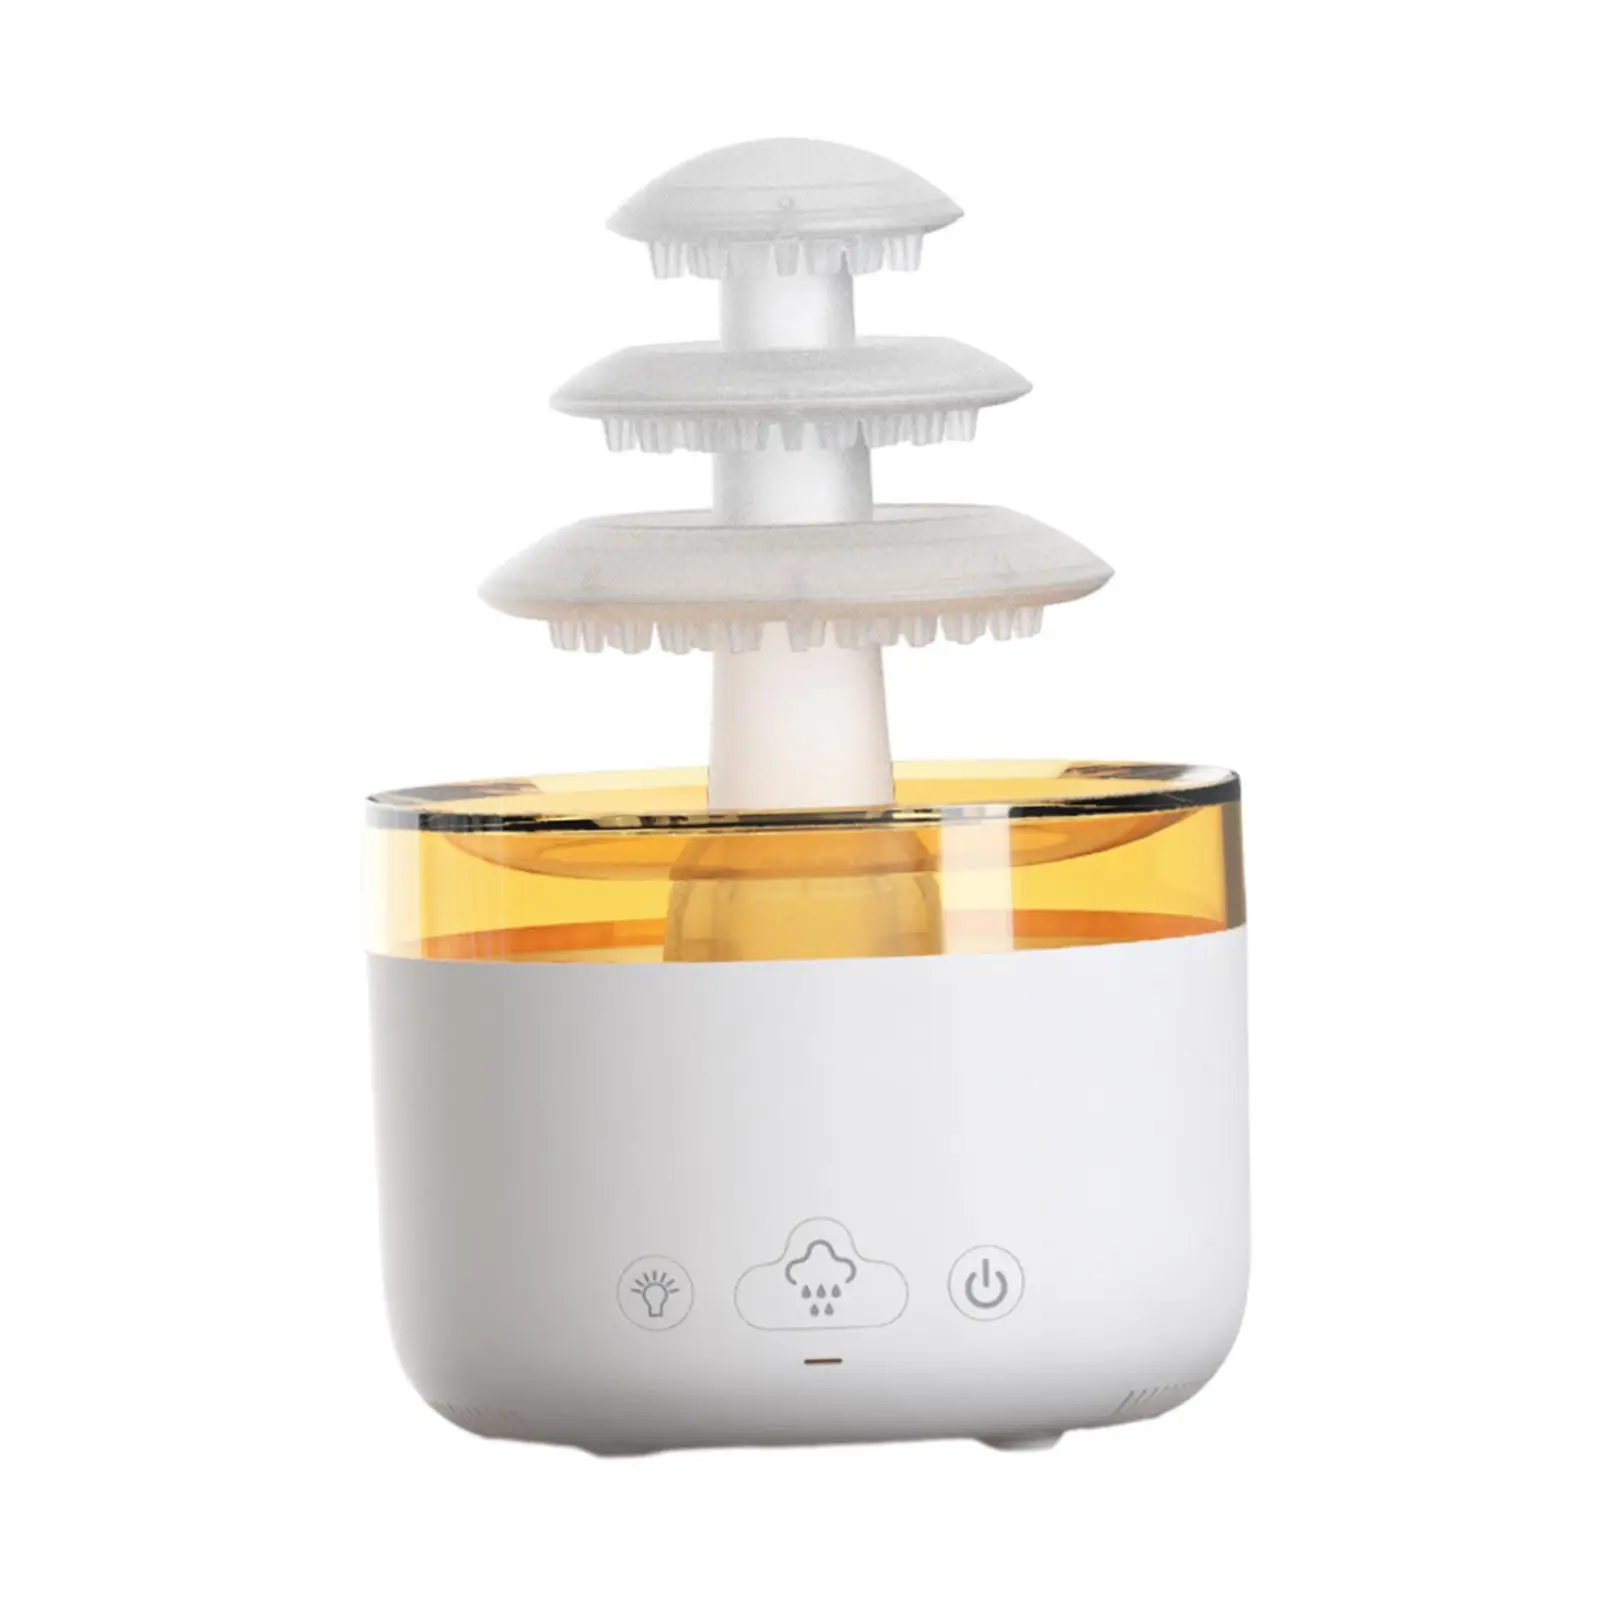 Diffusers for Essential Oils Premium Mist Diffuser for Office Study Pet Room